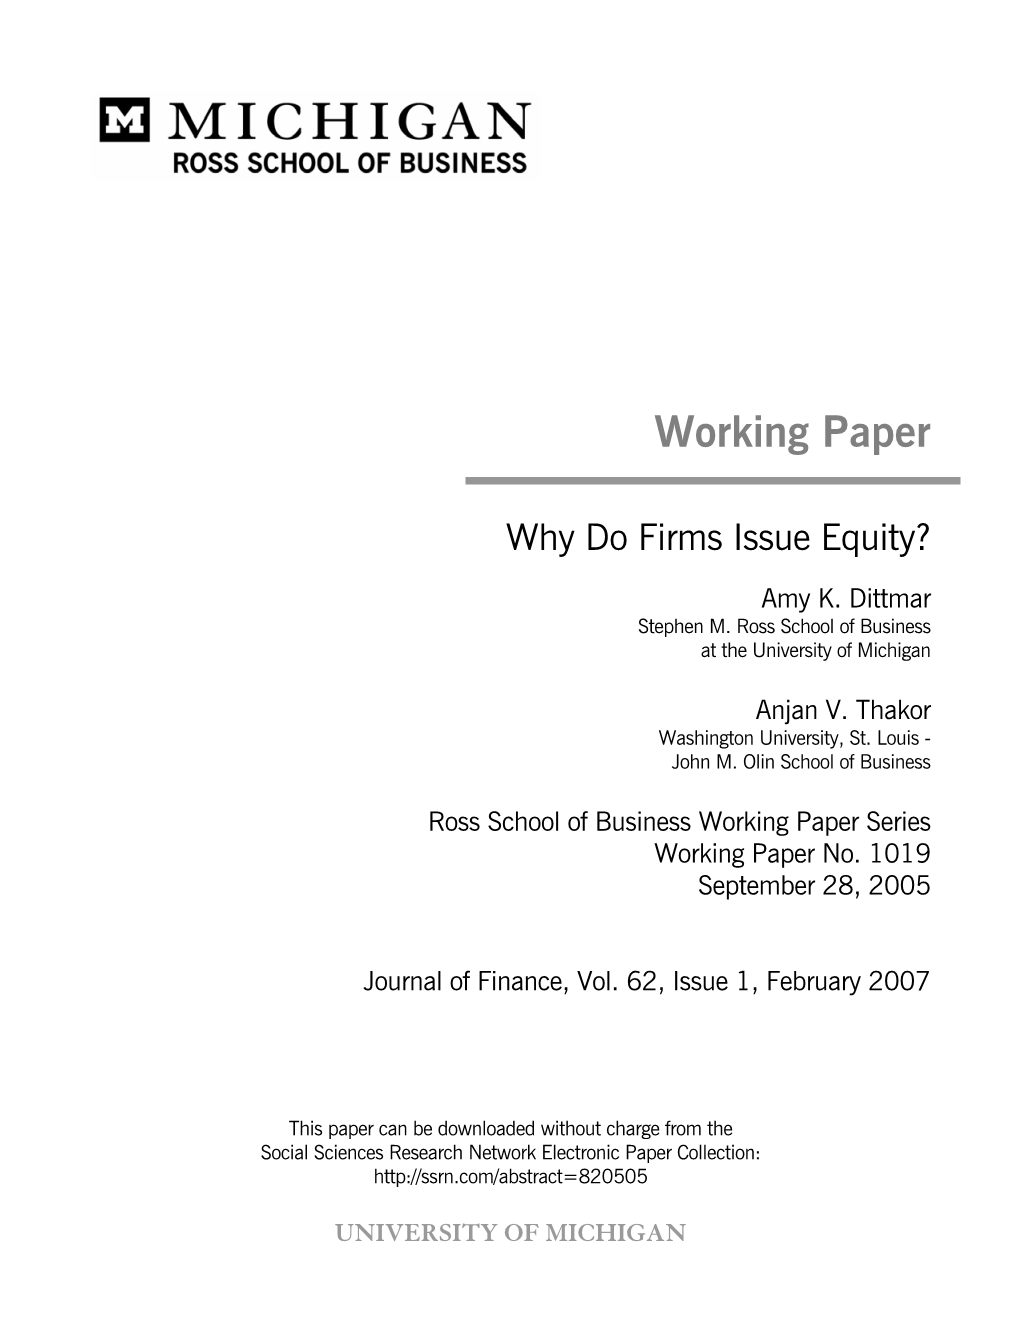 Why Do Firms Issue Equity?